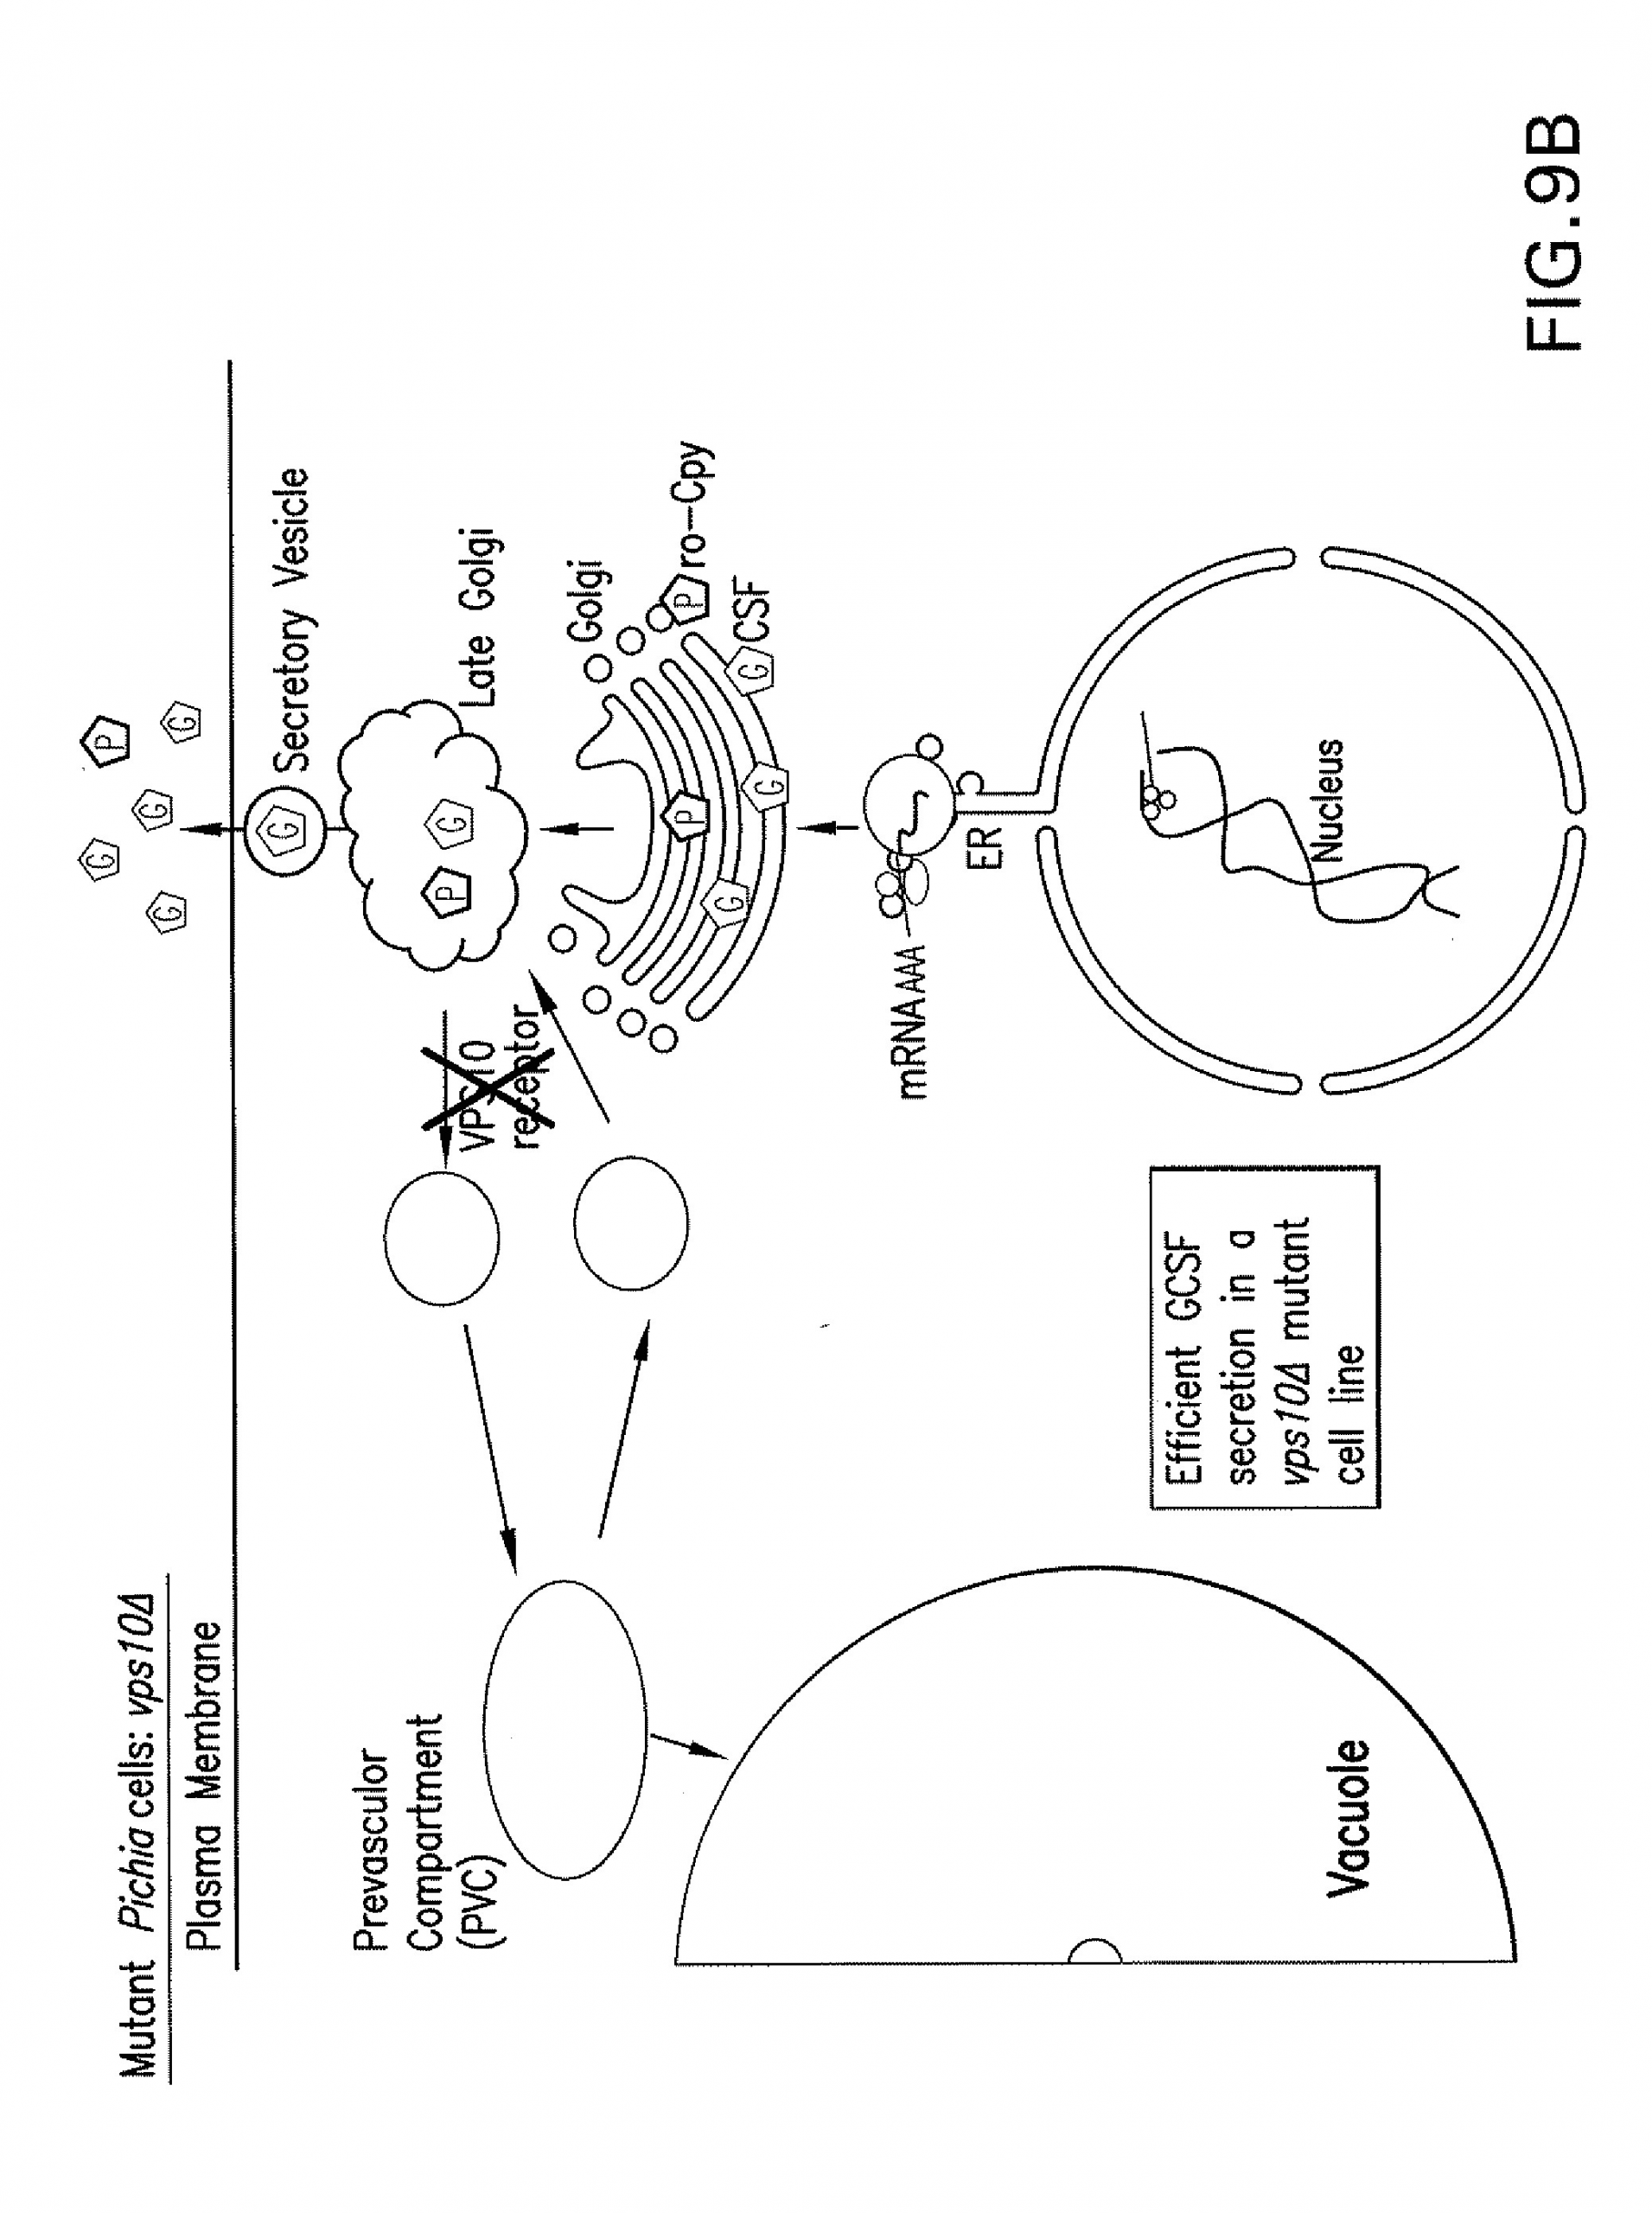 Nucleus Drawing Easy Us20130011875a1 Methods for the Production Of Recombinant